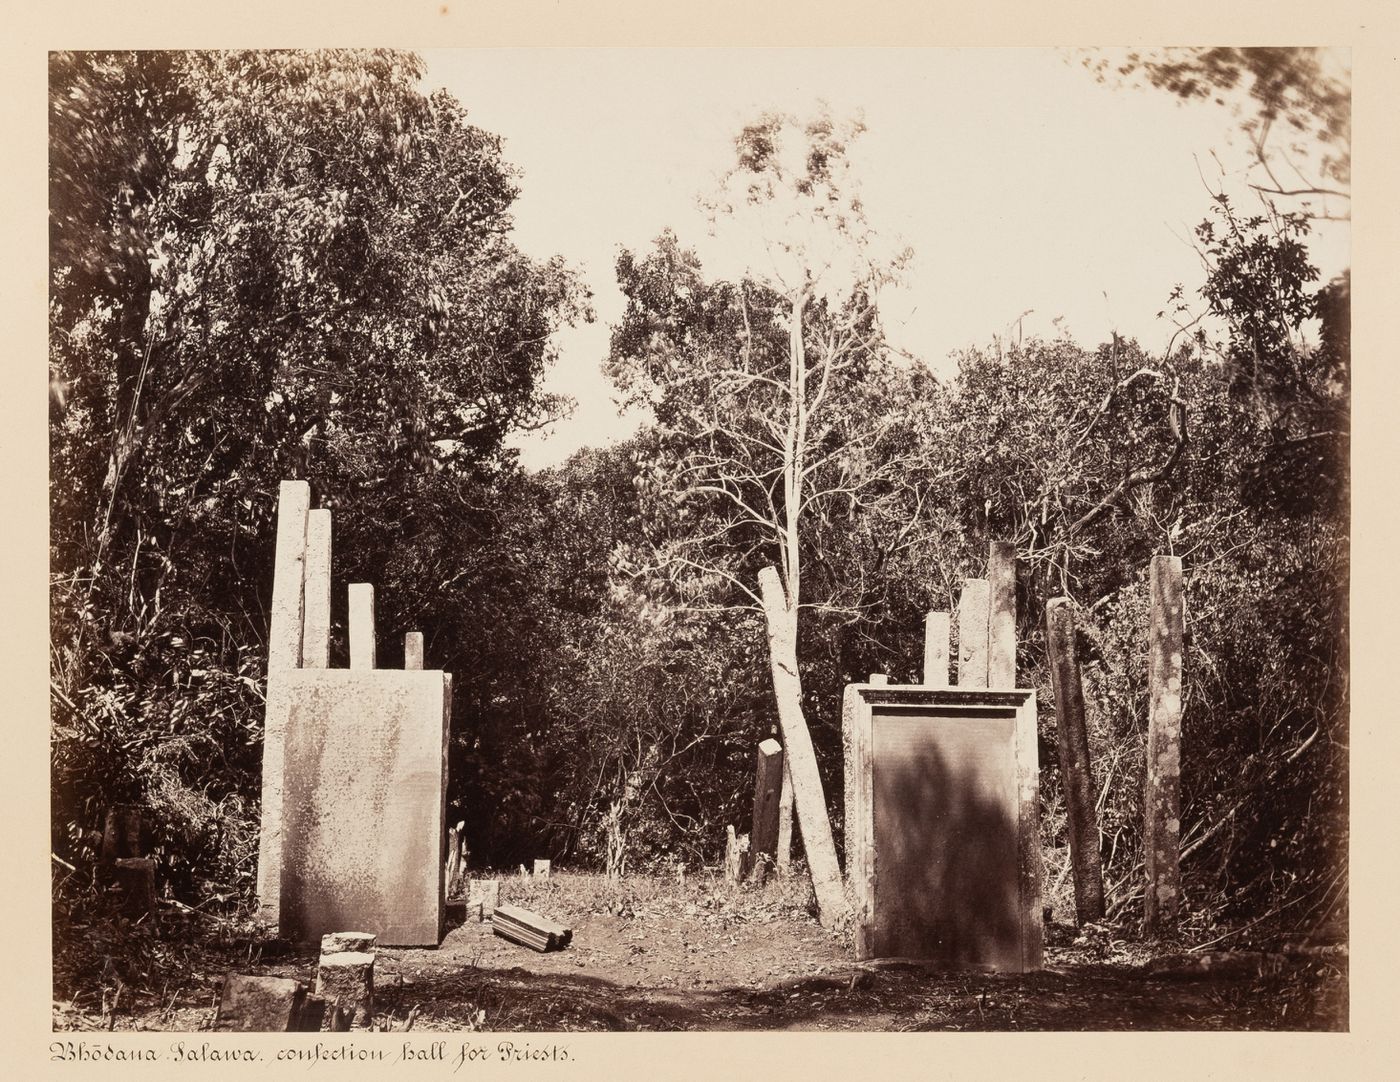 View of the ruins of a the Dana Salawa (also known as the Alms Hall and the Bhodana Salawa), Mihintale, Ceylon (now Sri Lanka)